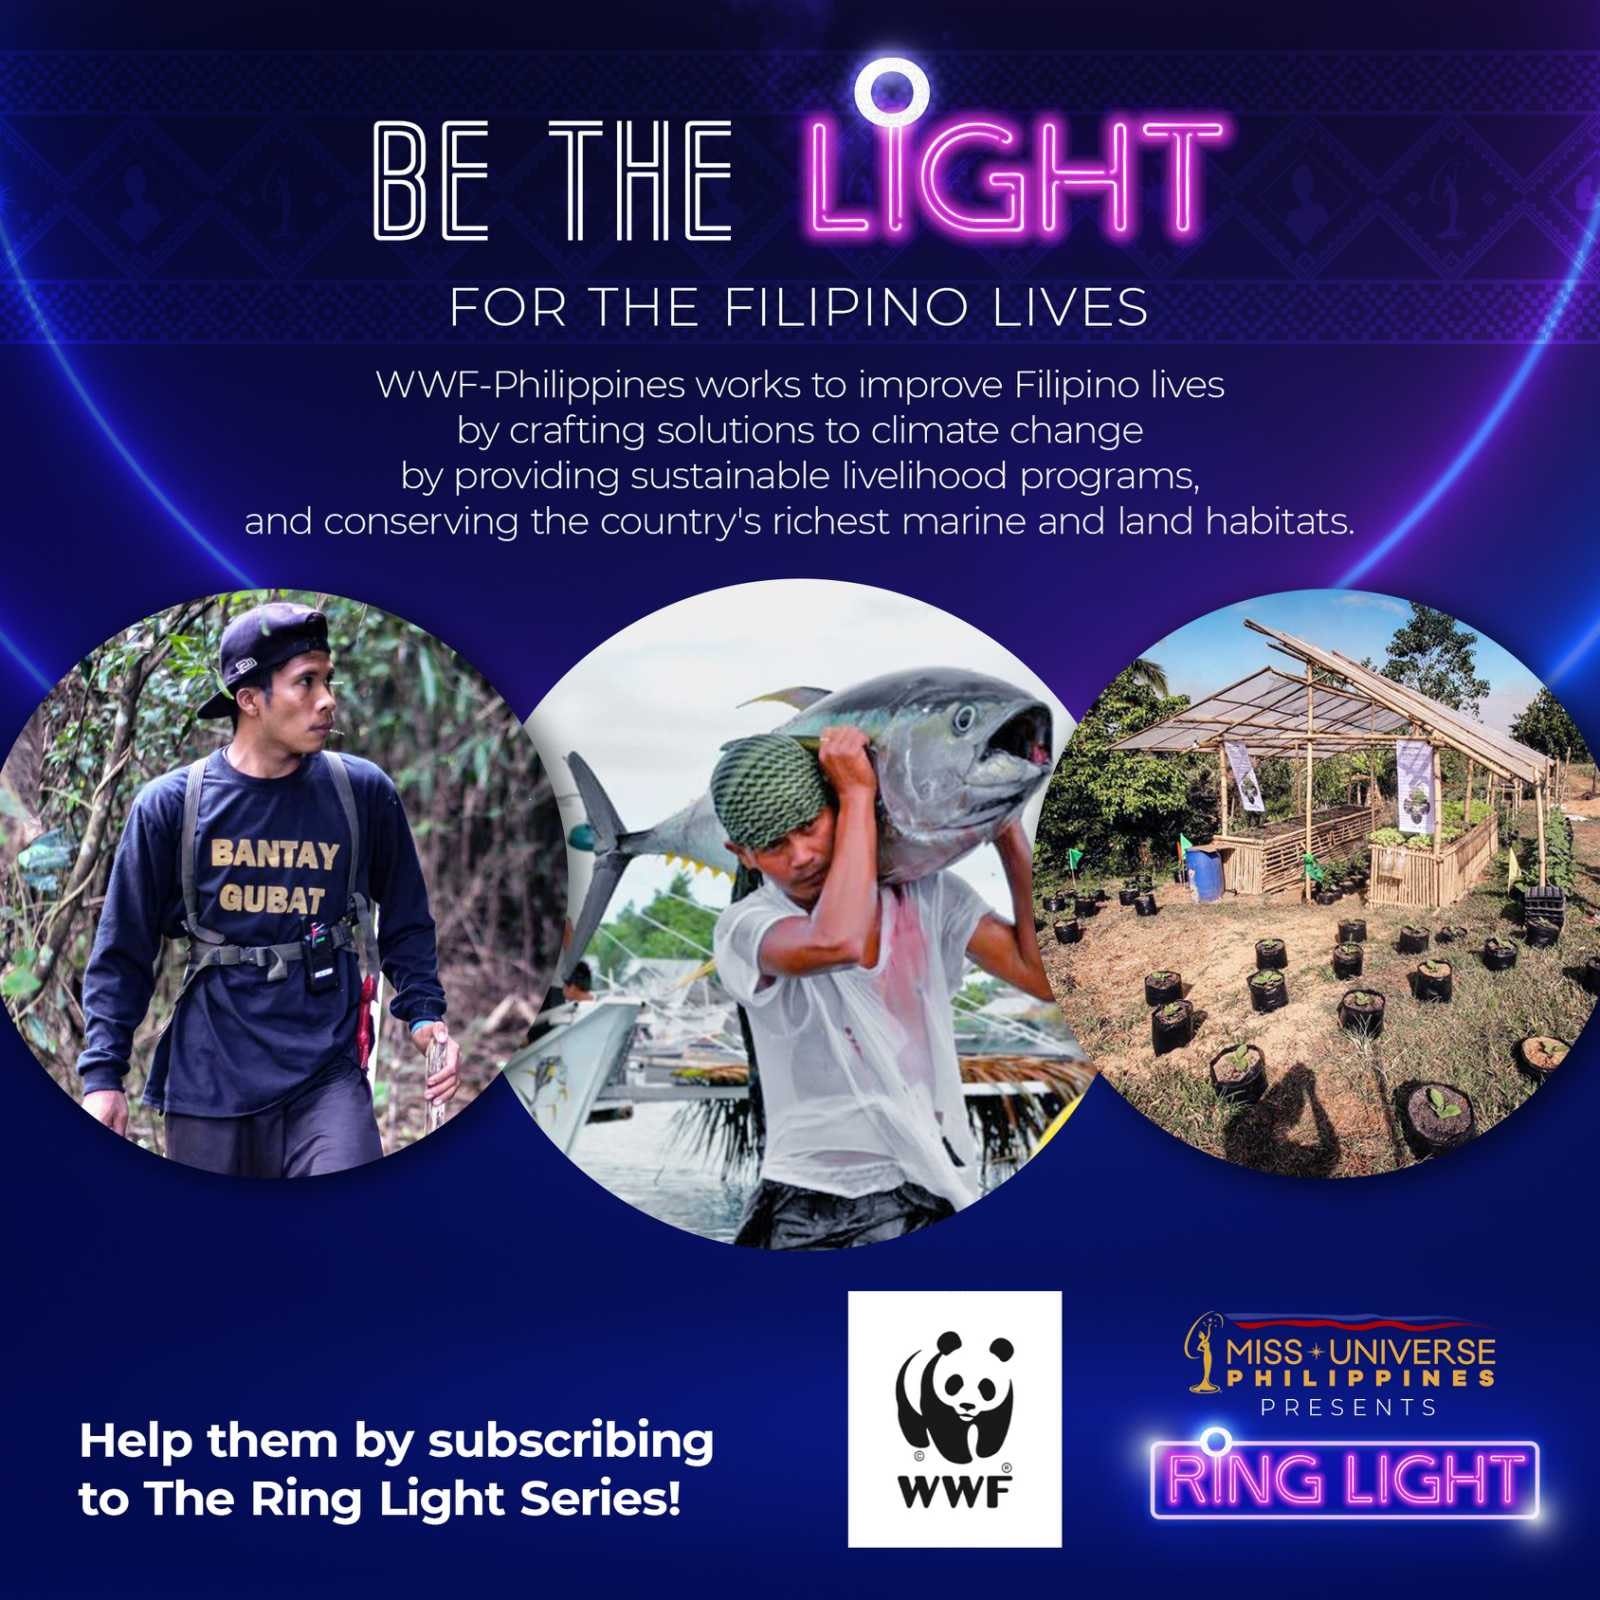 Miss Universe Philippines partners with 3 organizations for ‘Ring Light’ series